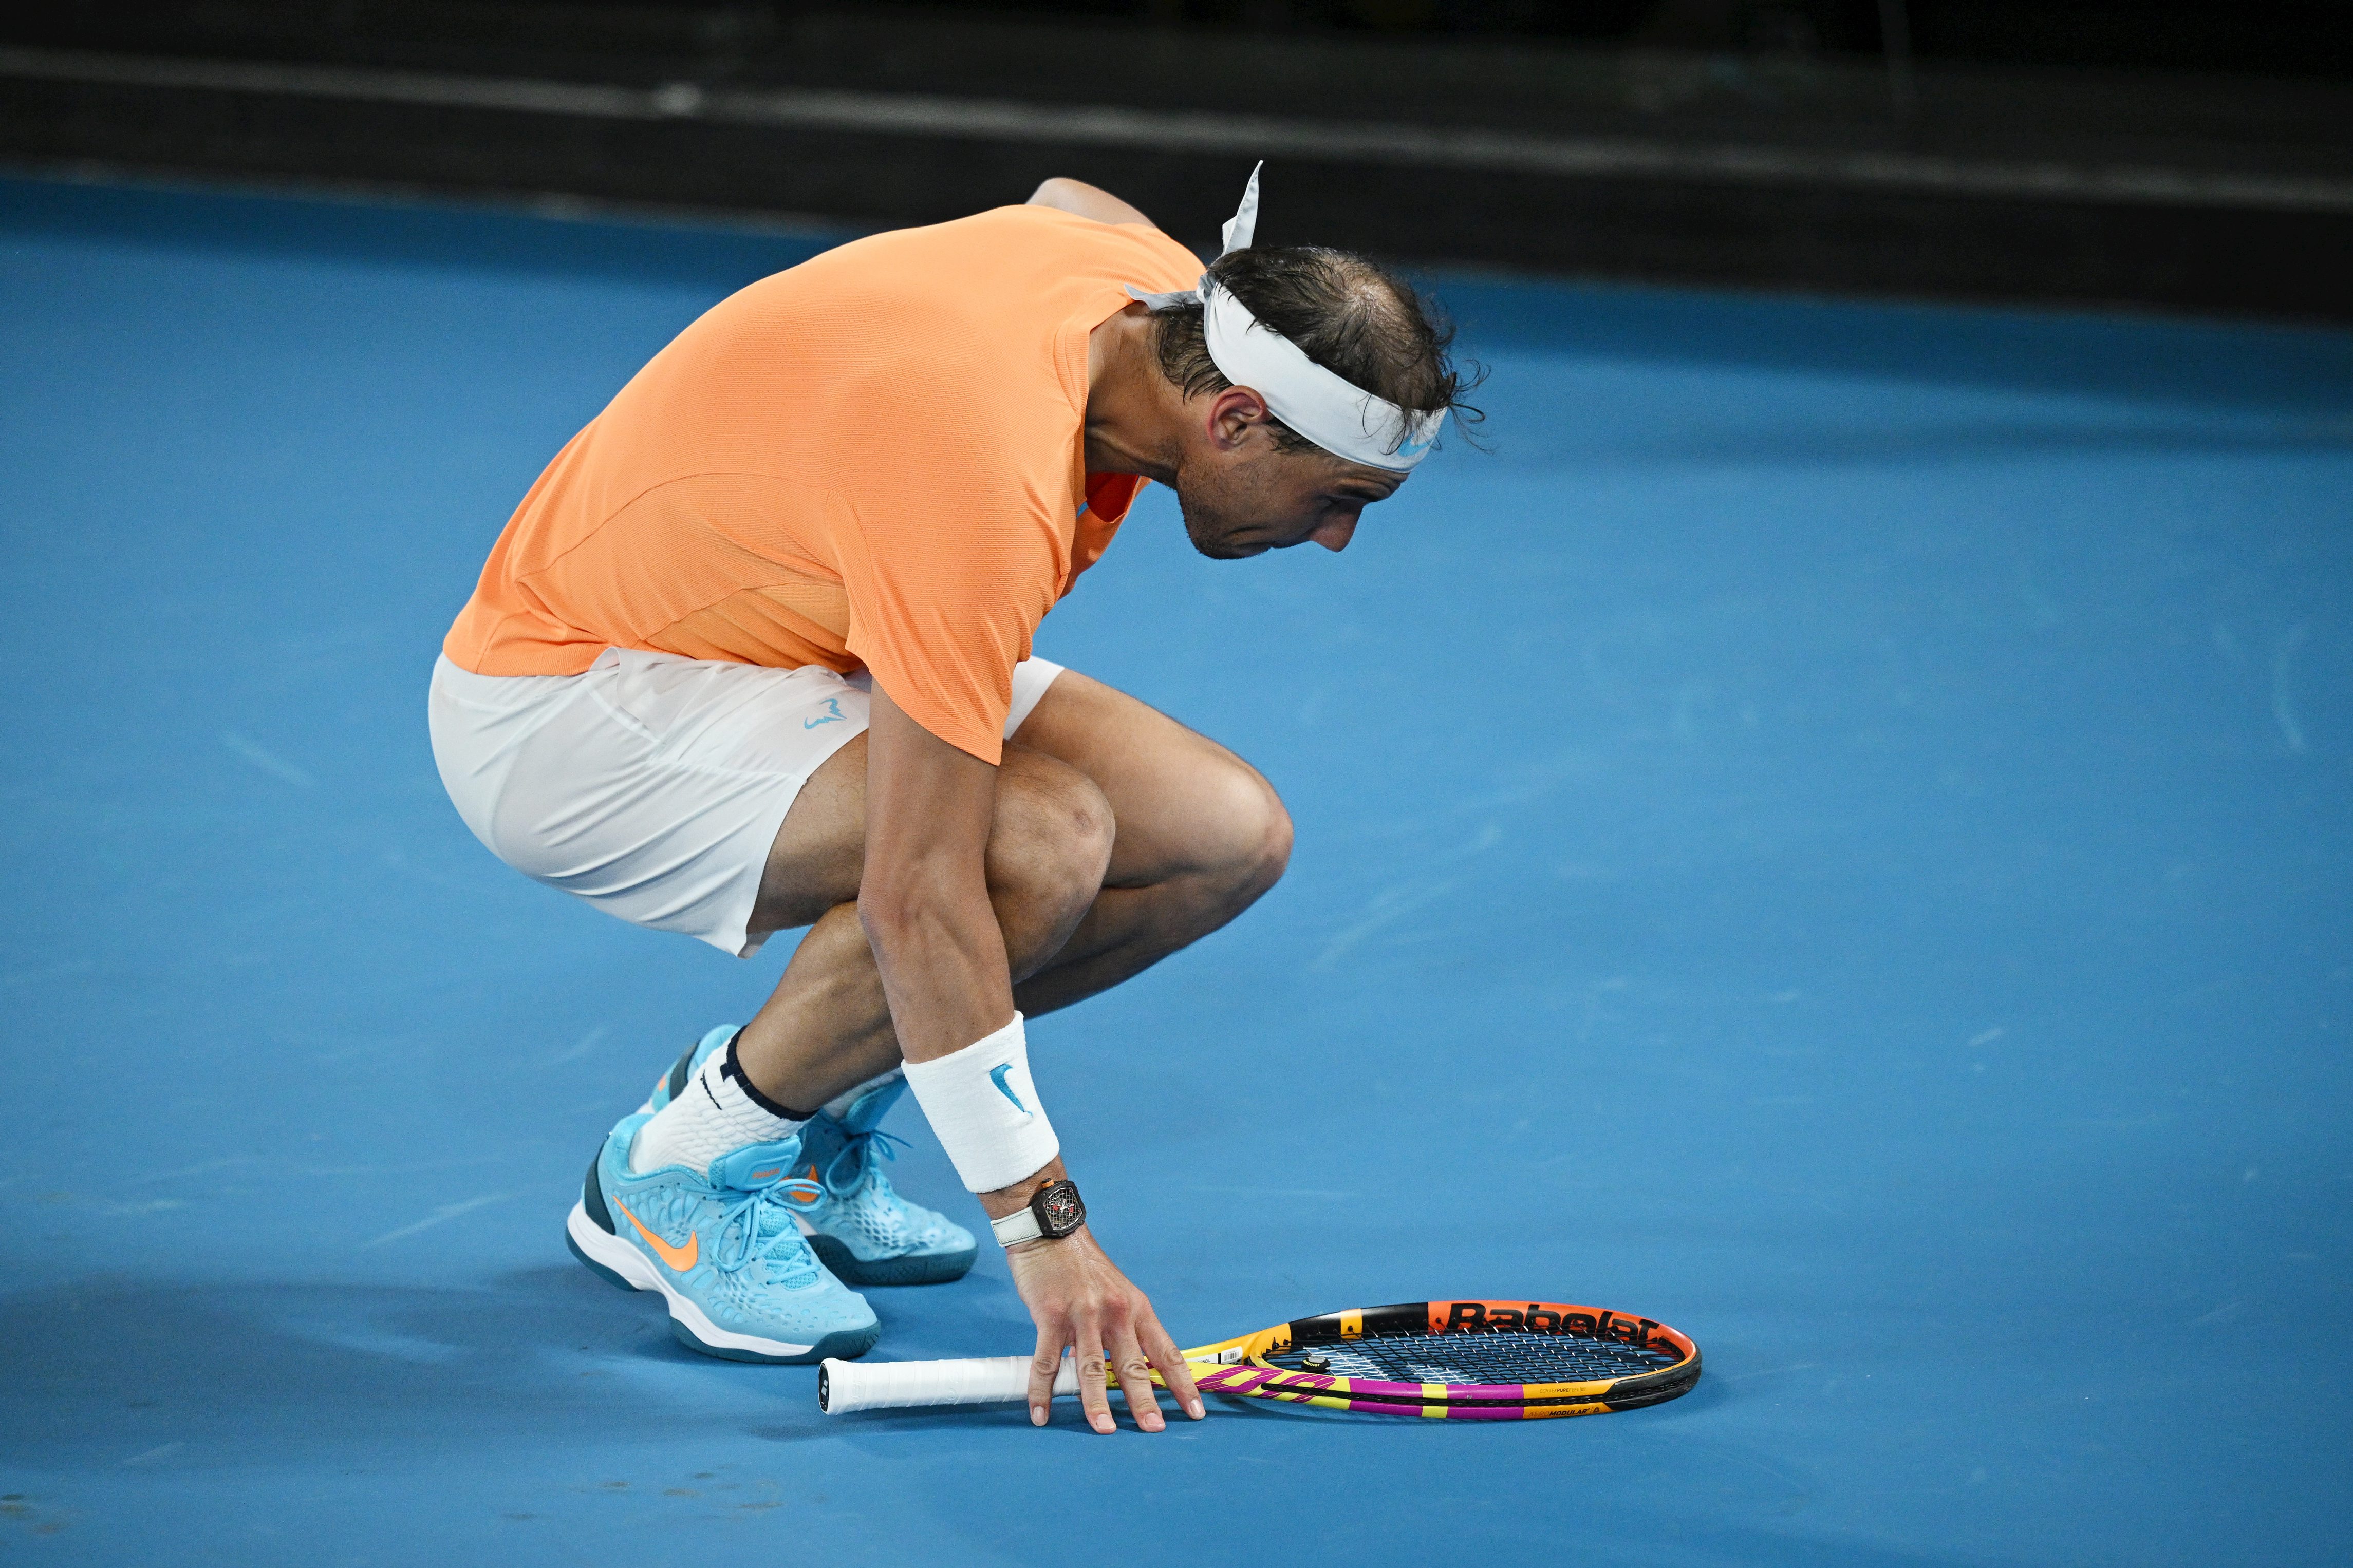 Nadal, squatting, after suffering a new episode of pain during his match against Mackenzie McDonald, in the second round of the Australian Open.